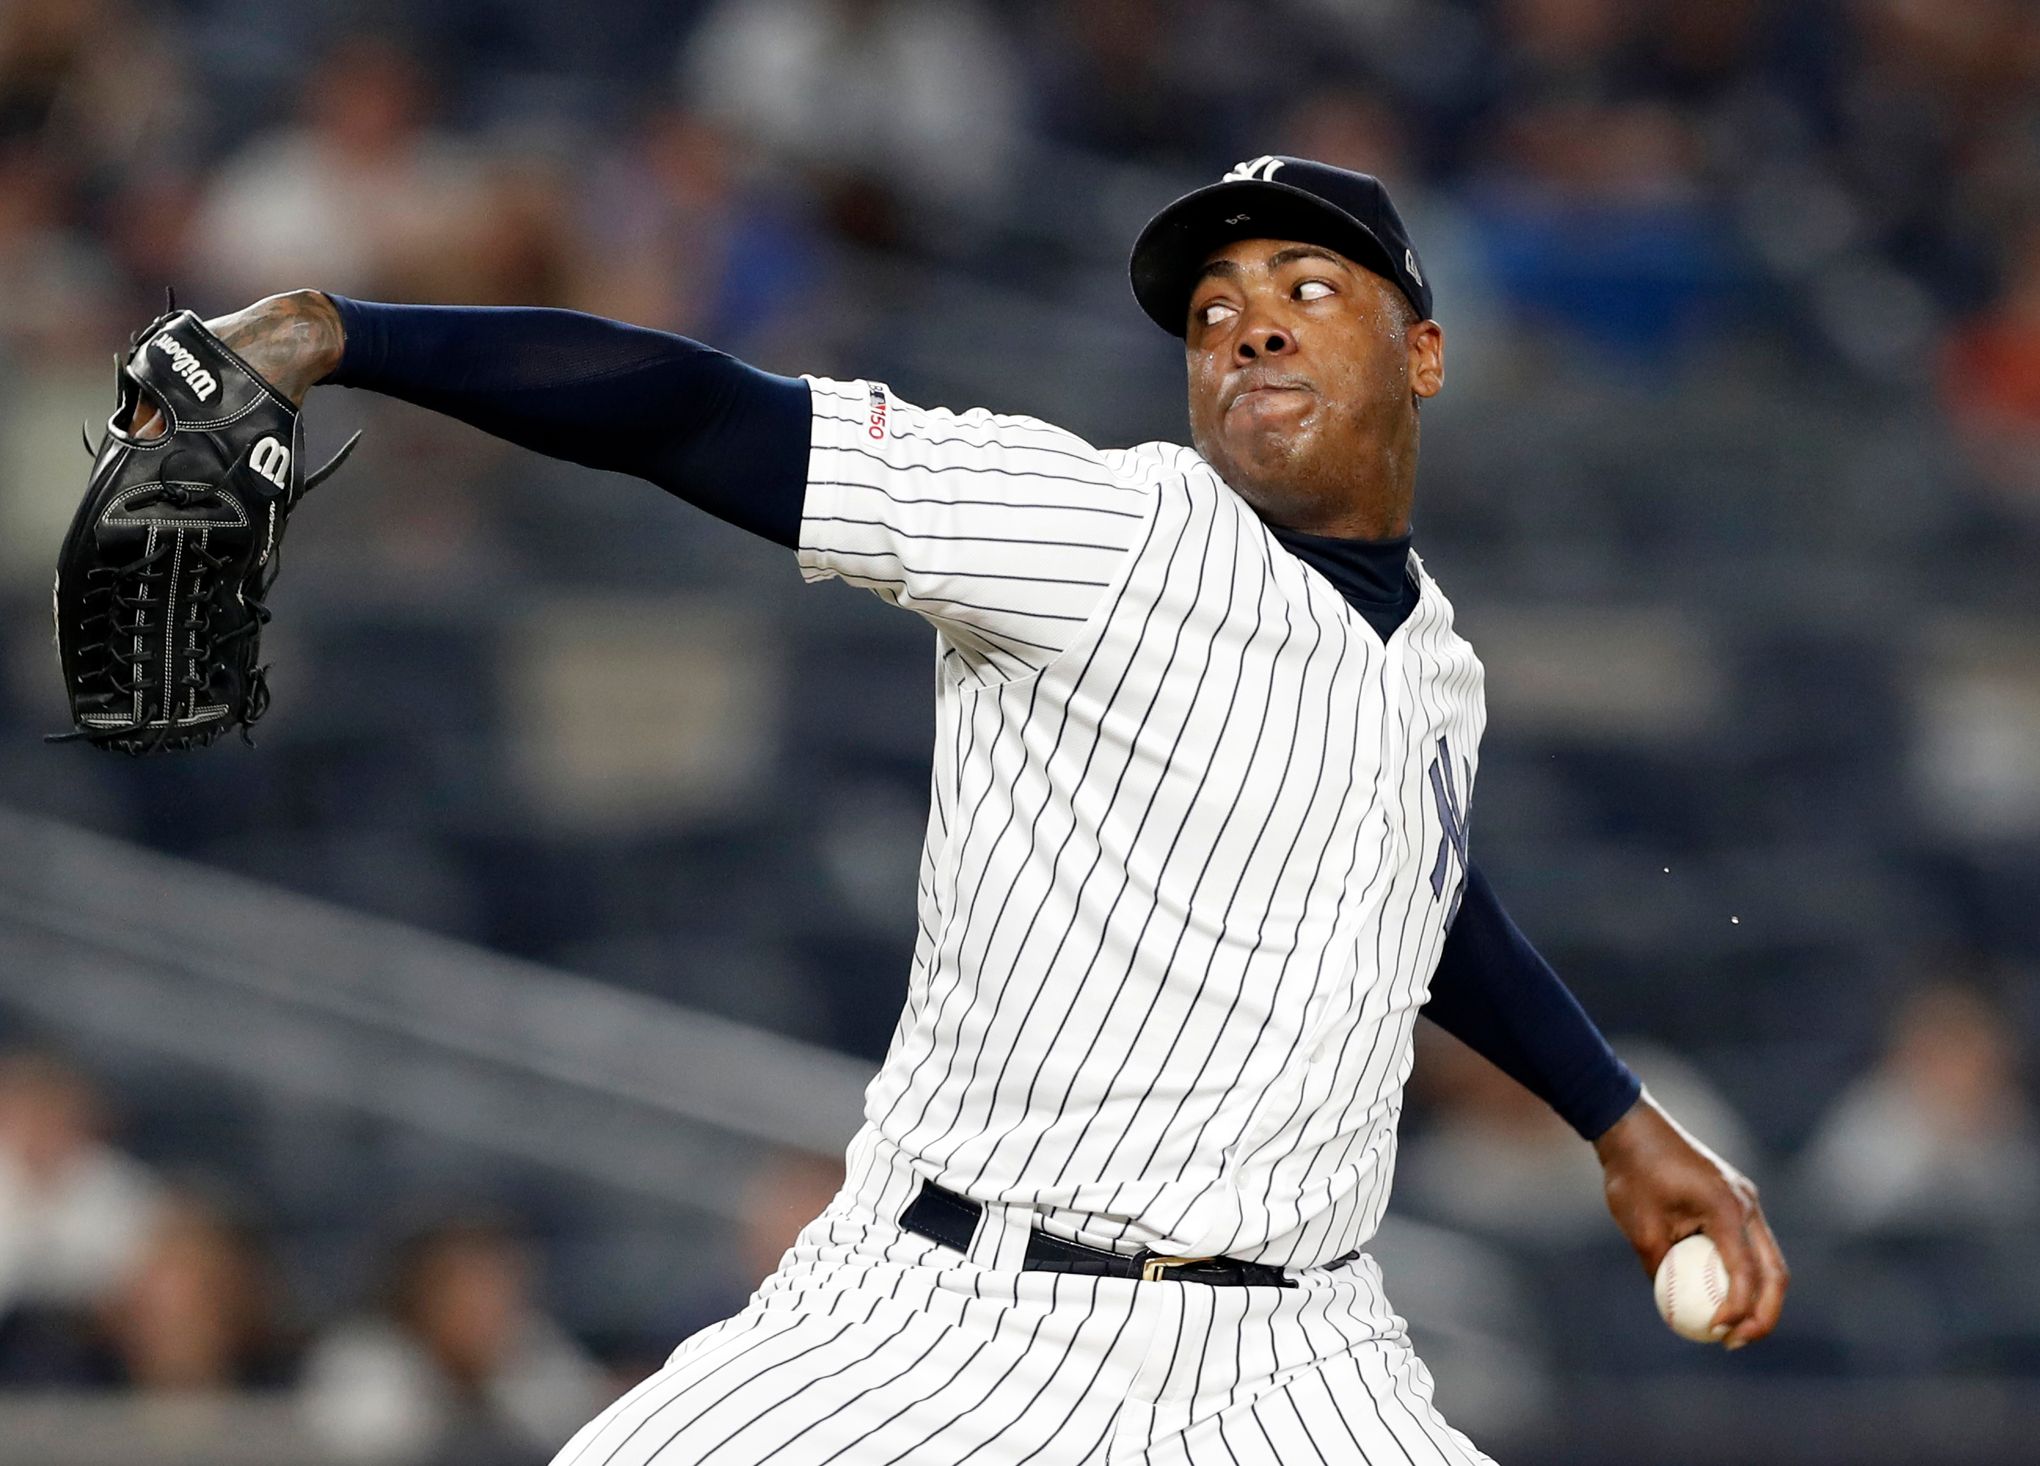 Yankees activate closer Chapman after COVID-19 bout